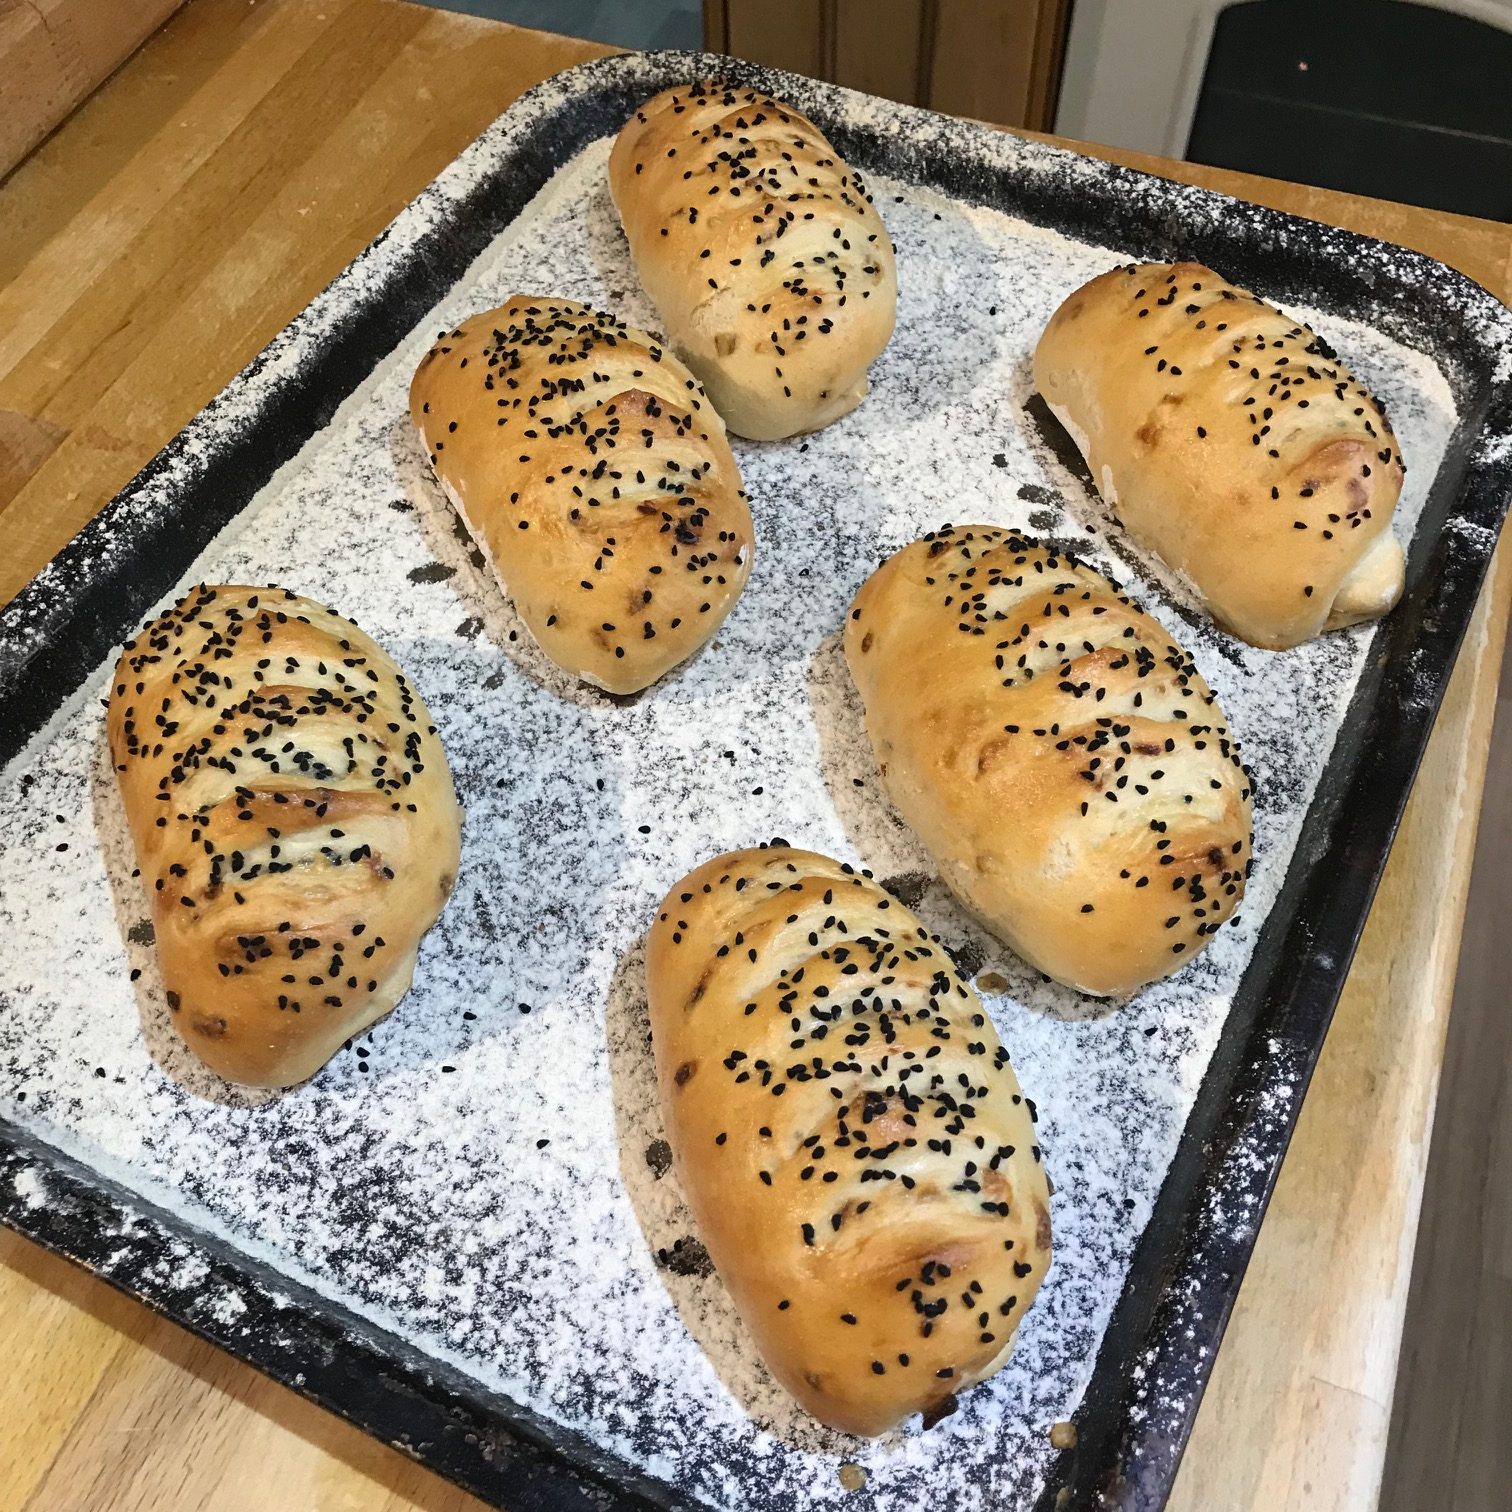 20190910 - Onion Bread Cooked